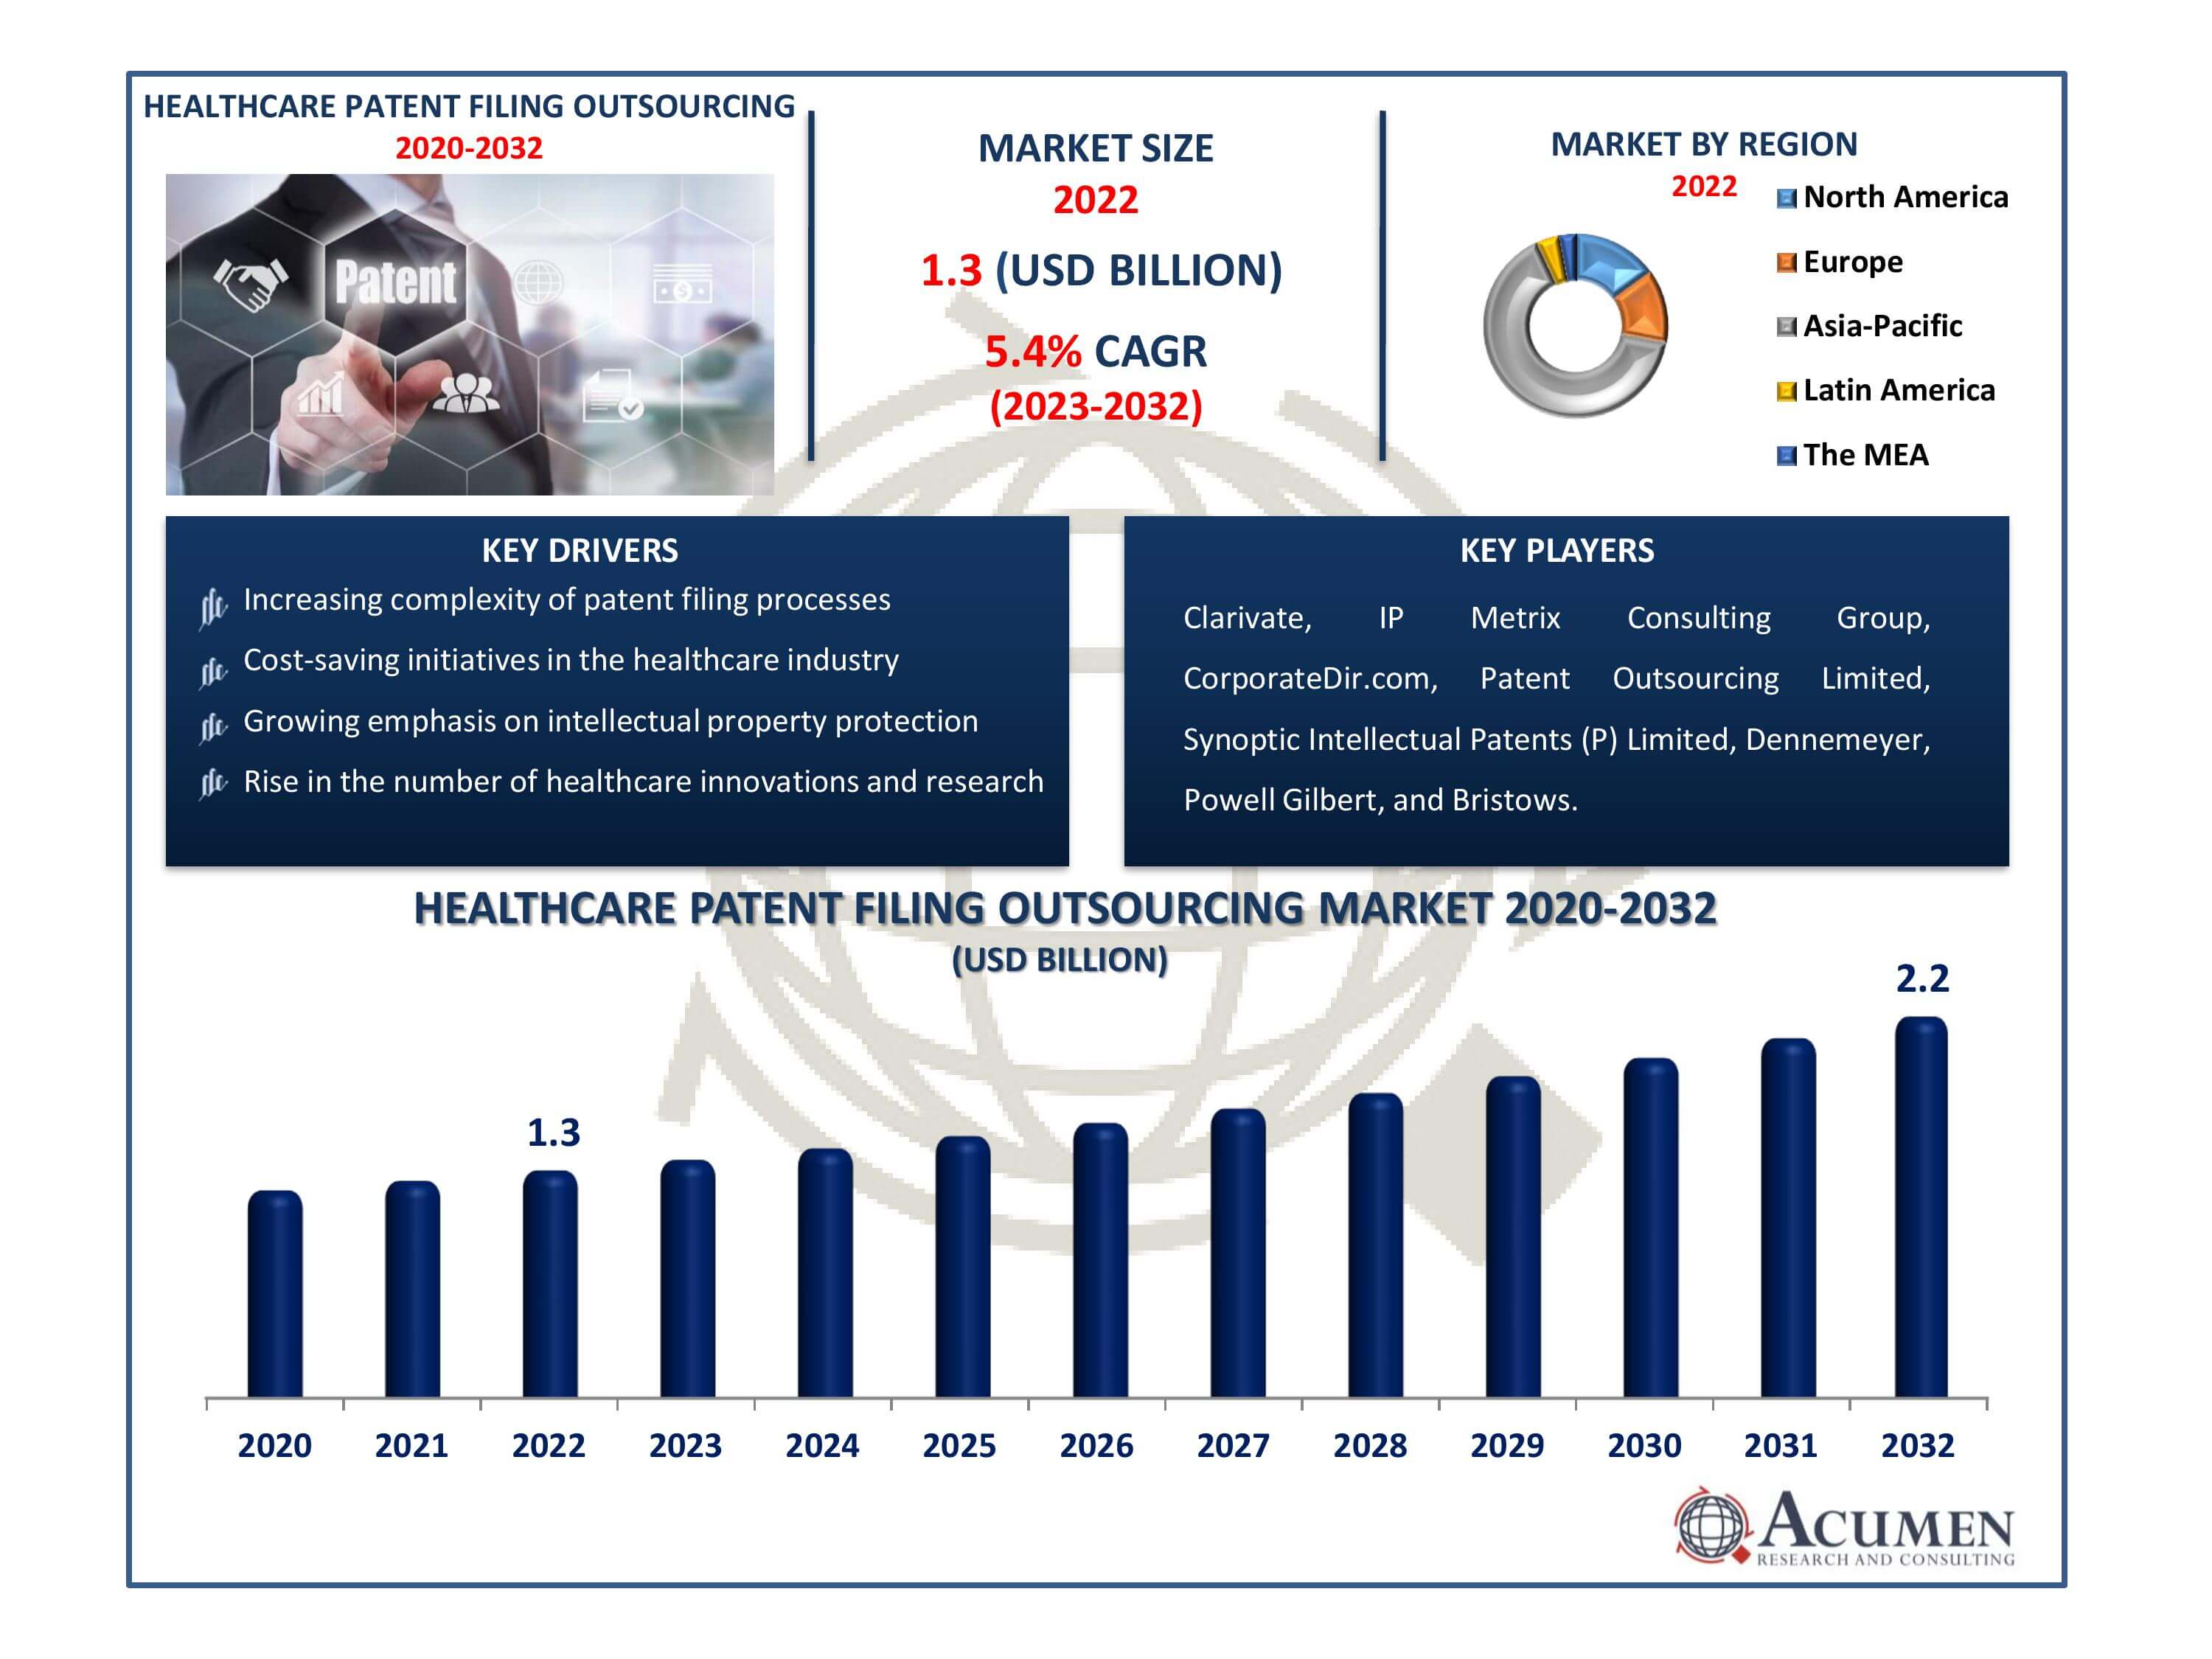 Healthcare Patent Filing Outsourcing Market Dynamics